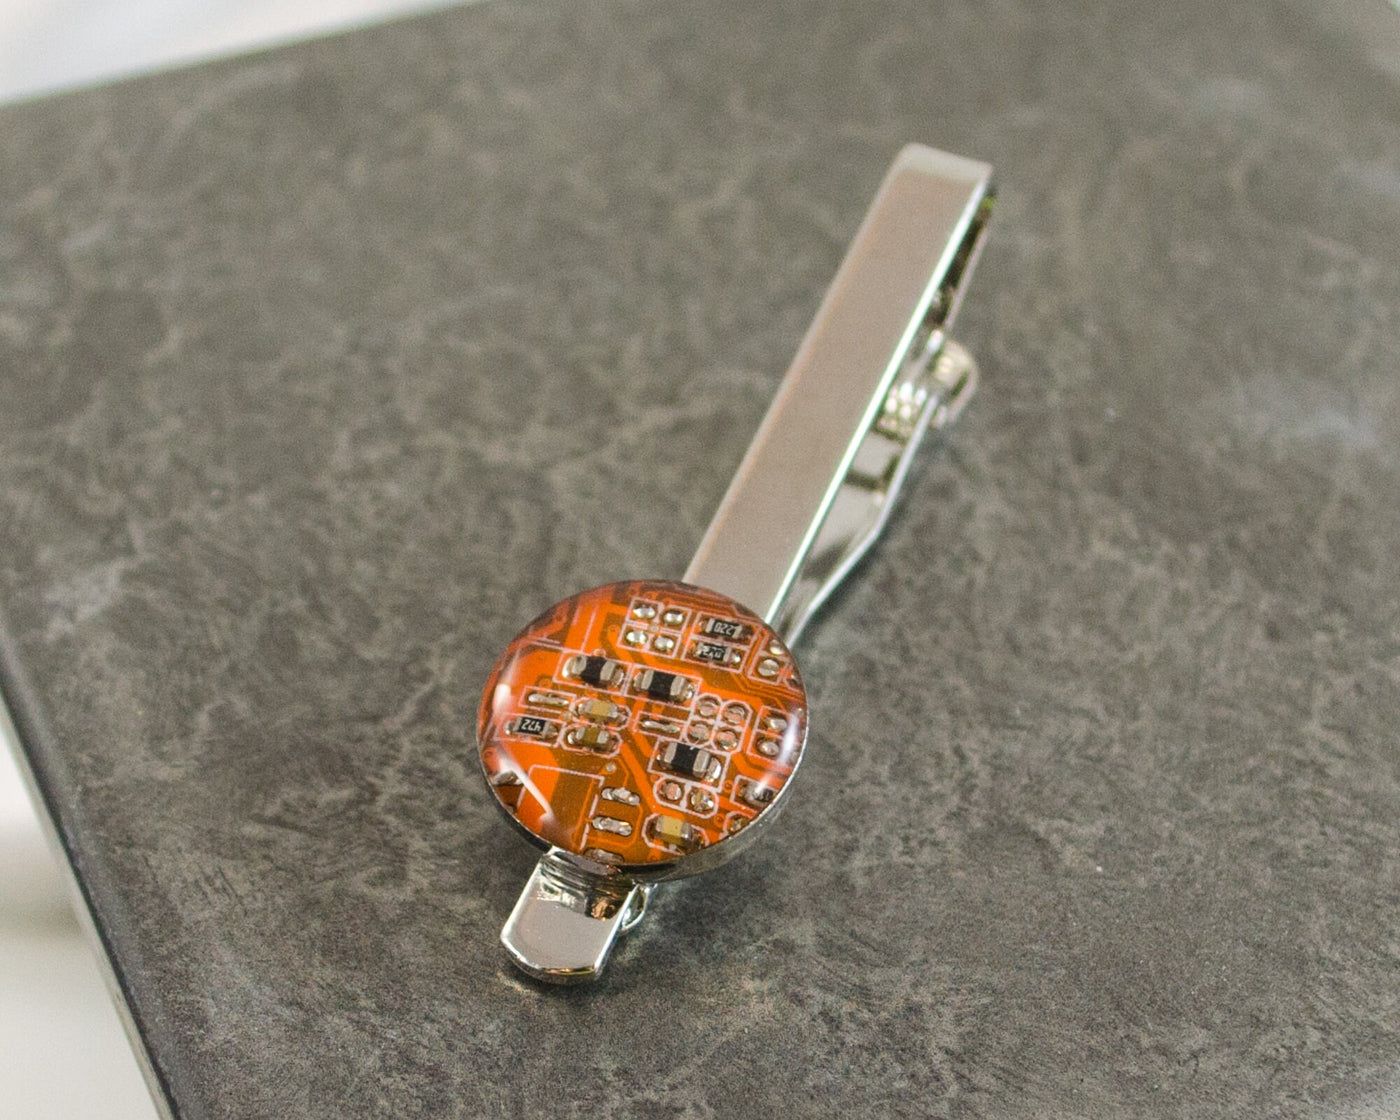 Circuit Board Tie Bar Orange, Recycled Computer Tie Clip, Geeky Gift, Wearable Technology, Nerdy Engineer Gifts, Fathers Day Gift